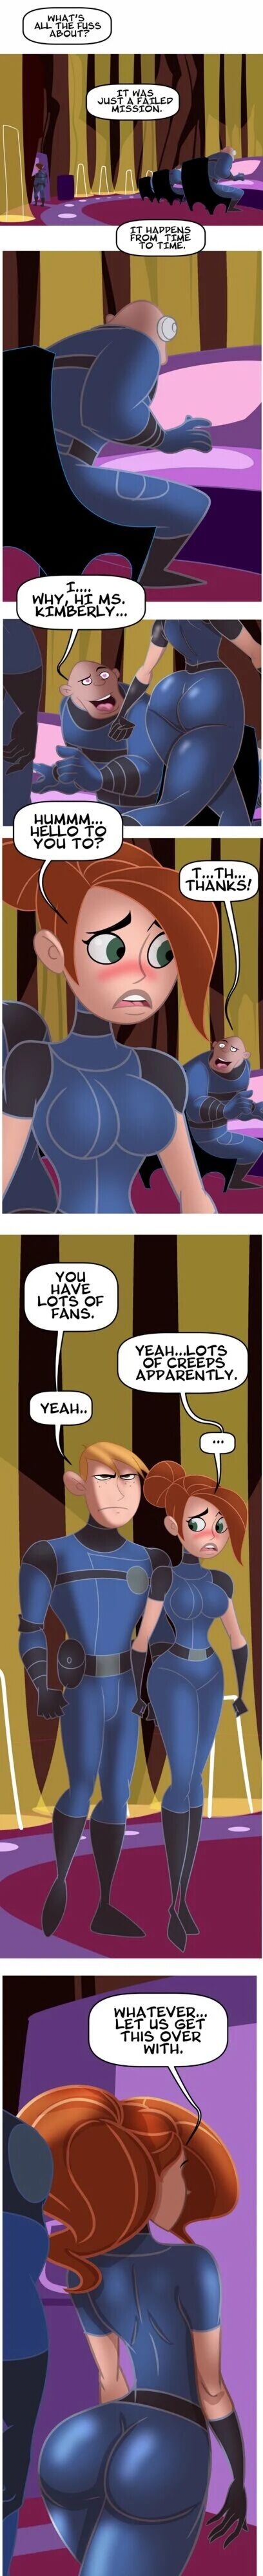 Kinky Possible - Becoming A Queen Of Spades (Kim Possible) [Tease Comix] - 2 - english 5